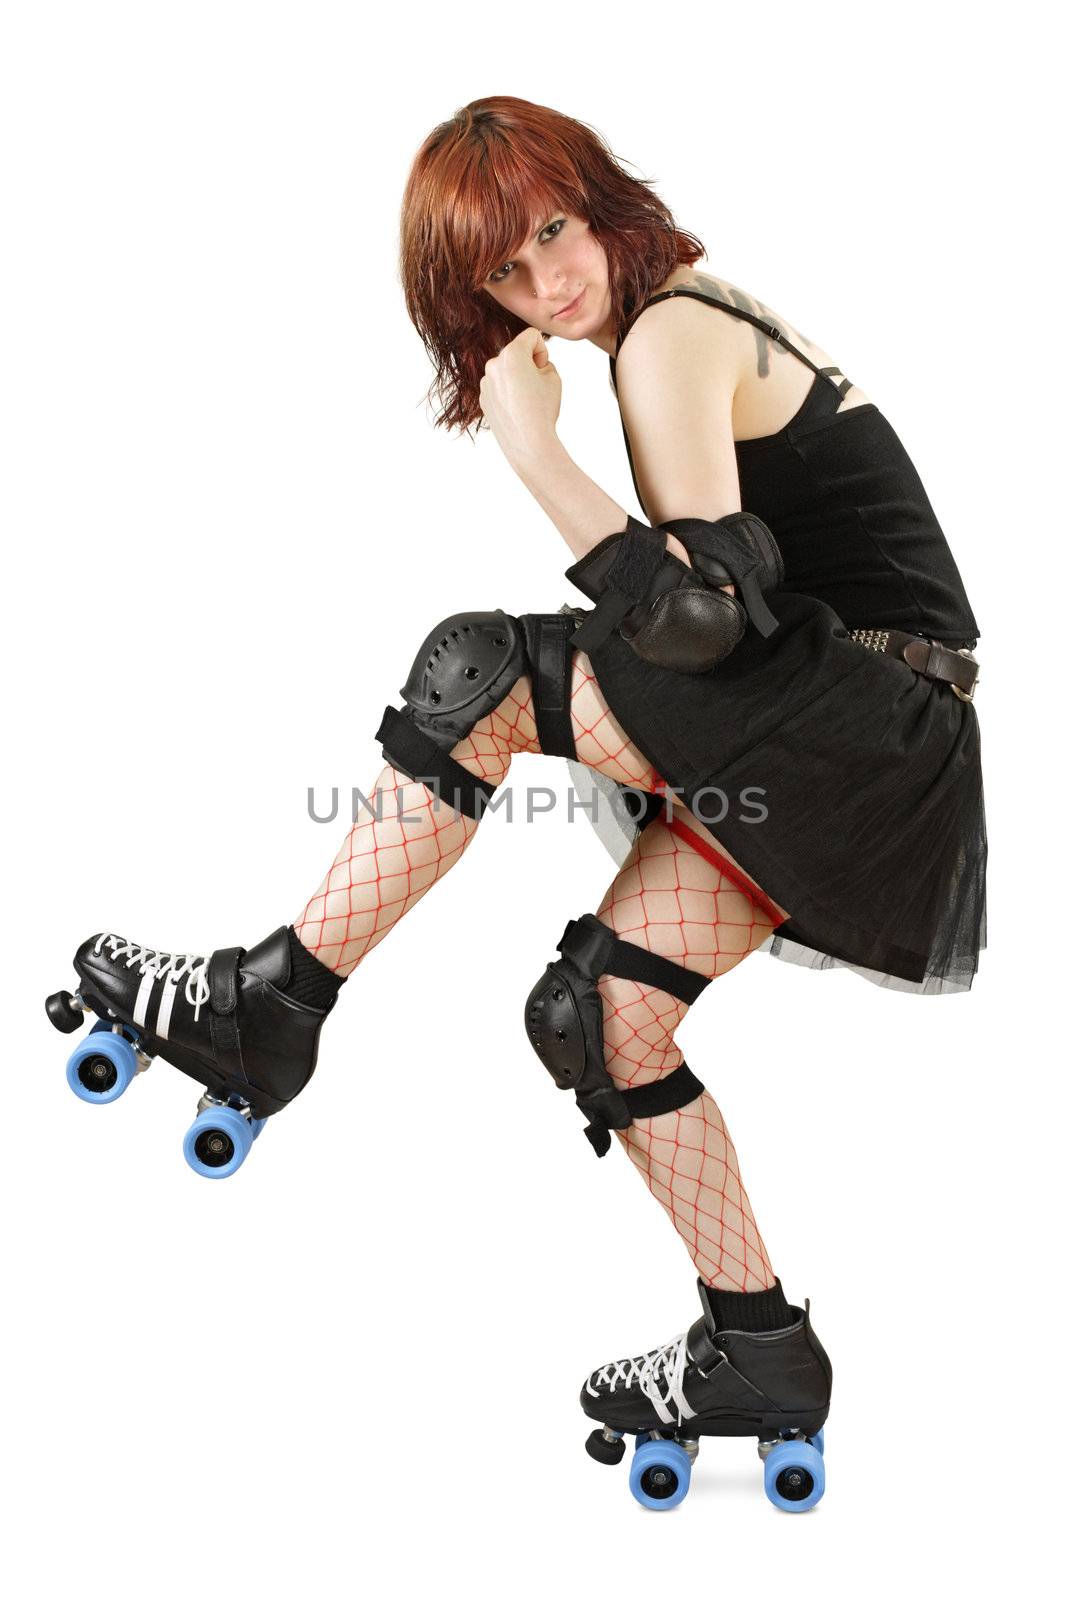 Photograph of a roller derby girl posing with her equipment. Slight shadow under skate.